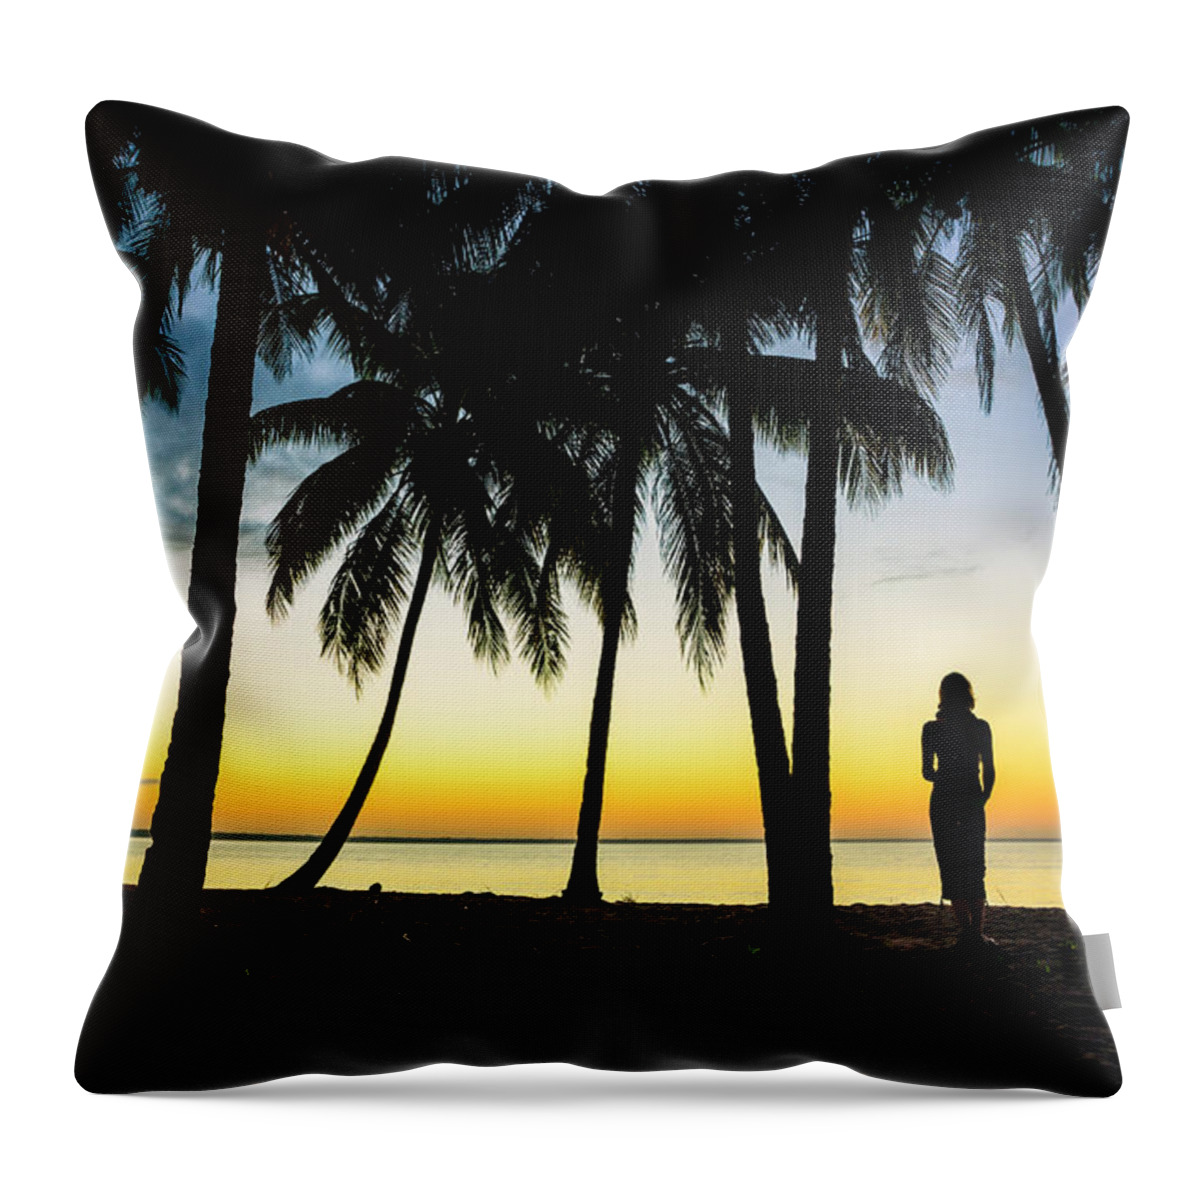 Scenics Throw Pillow featuring the photograph Woman On A Carribean Beach Watching by Spooh